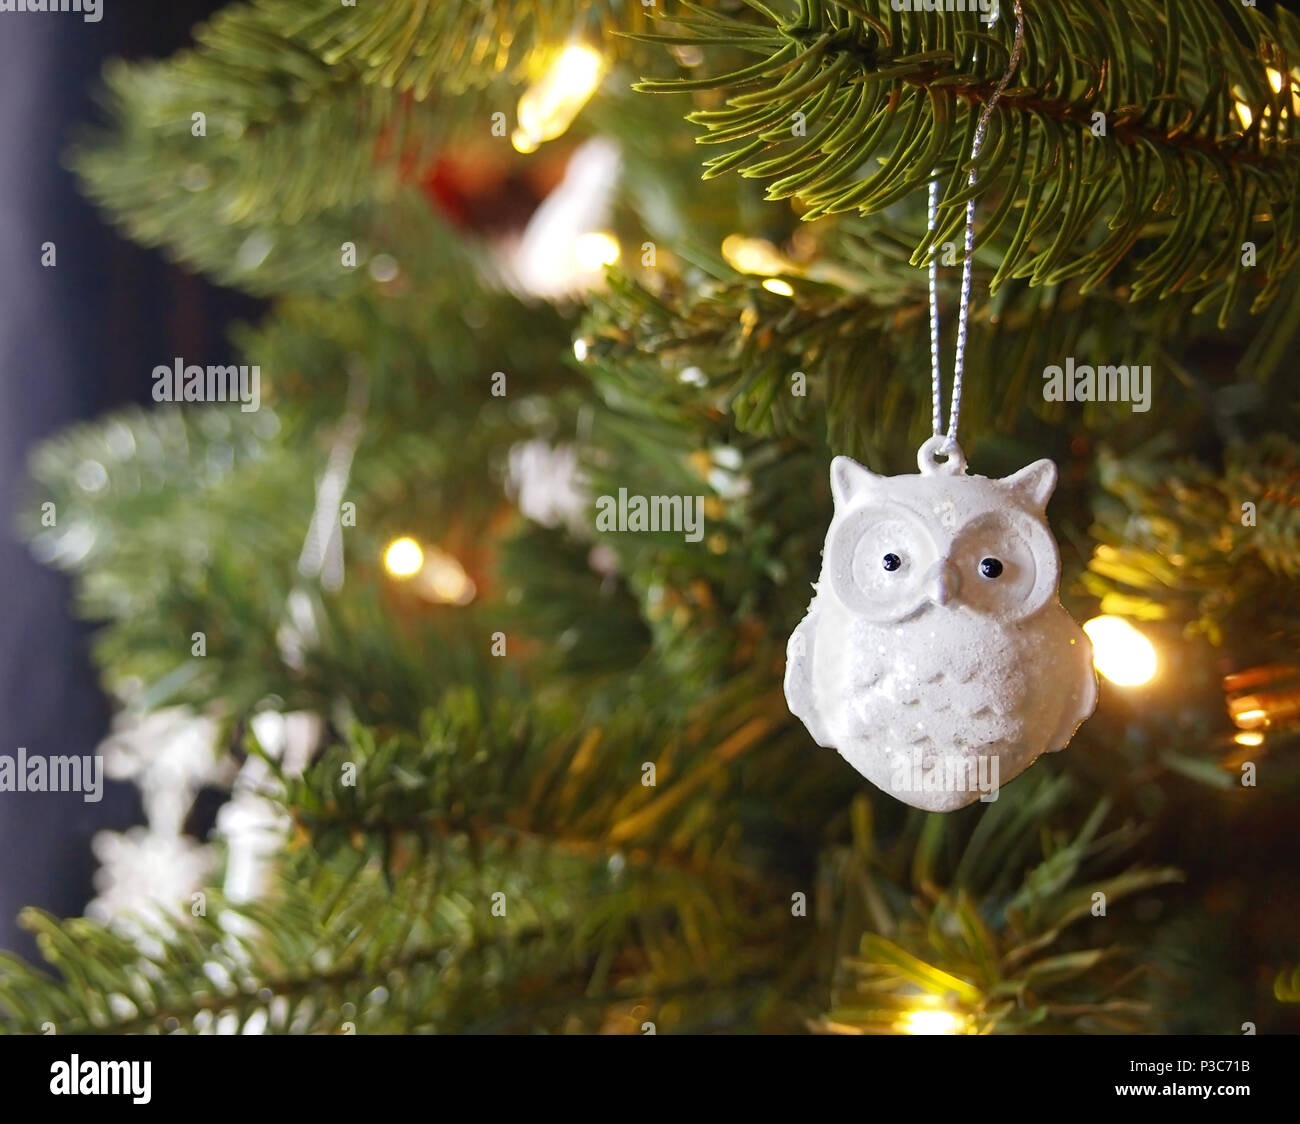 A sparkly white ceramic owl Christmas tree ornament with glitter hangs from a branch of a Christmas tree with glowing golden lights. Stock Photo